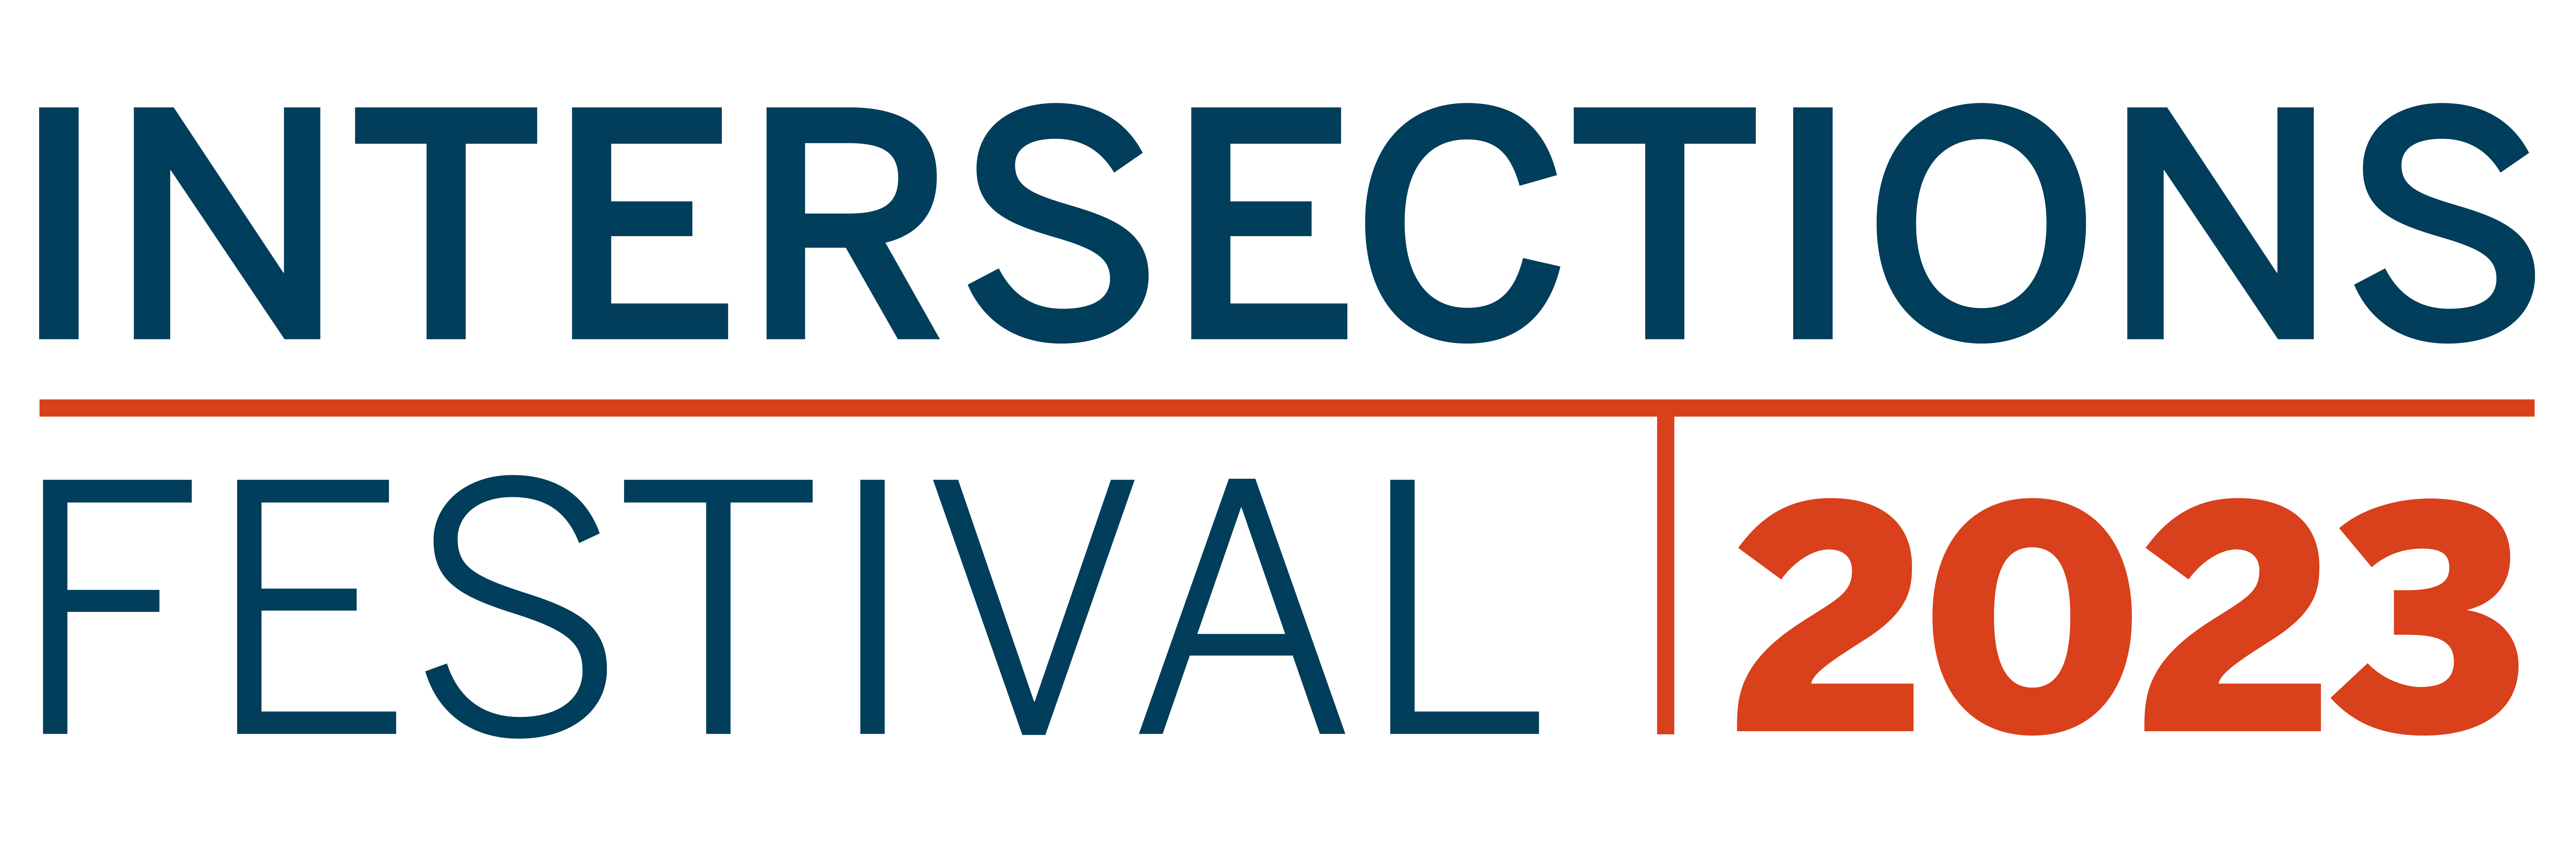 Intersections Festival 2023